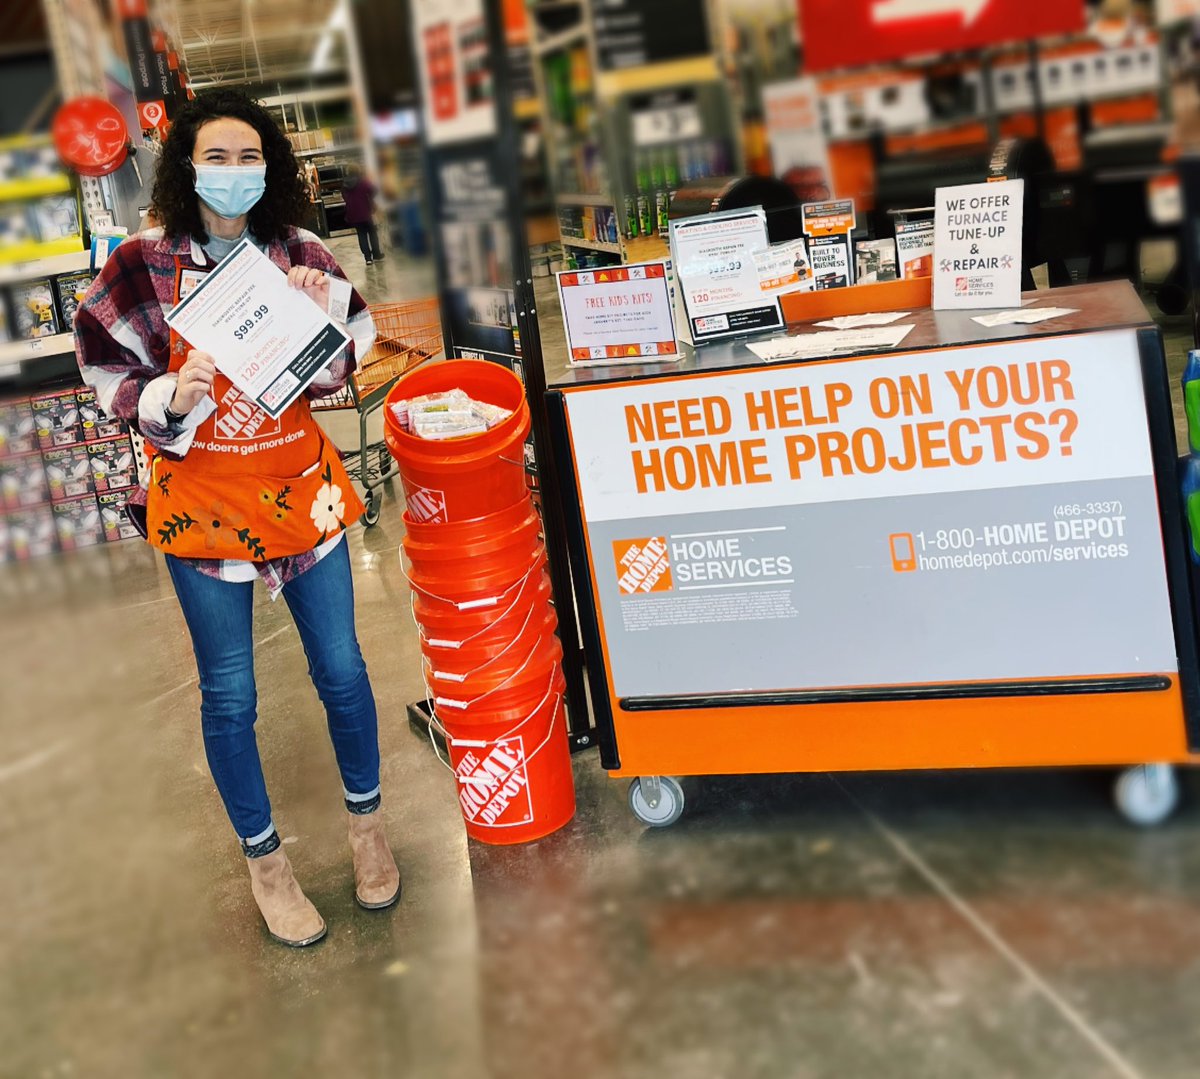 Got our focus on HVAC here at #2211proud this weekend🙌🏼 We’re ready to help keep your furnace in tip top shape this winter☃️ #2211doesitforyou @JOakleyTHD @JohnnyTBush @ryanfox_5024 @mjgolf74 @HDMarthaMendoza